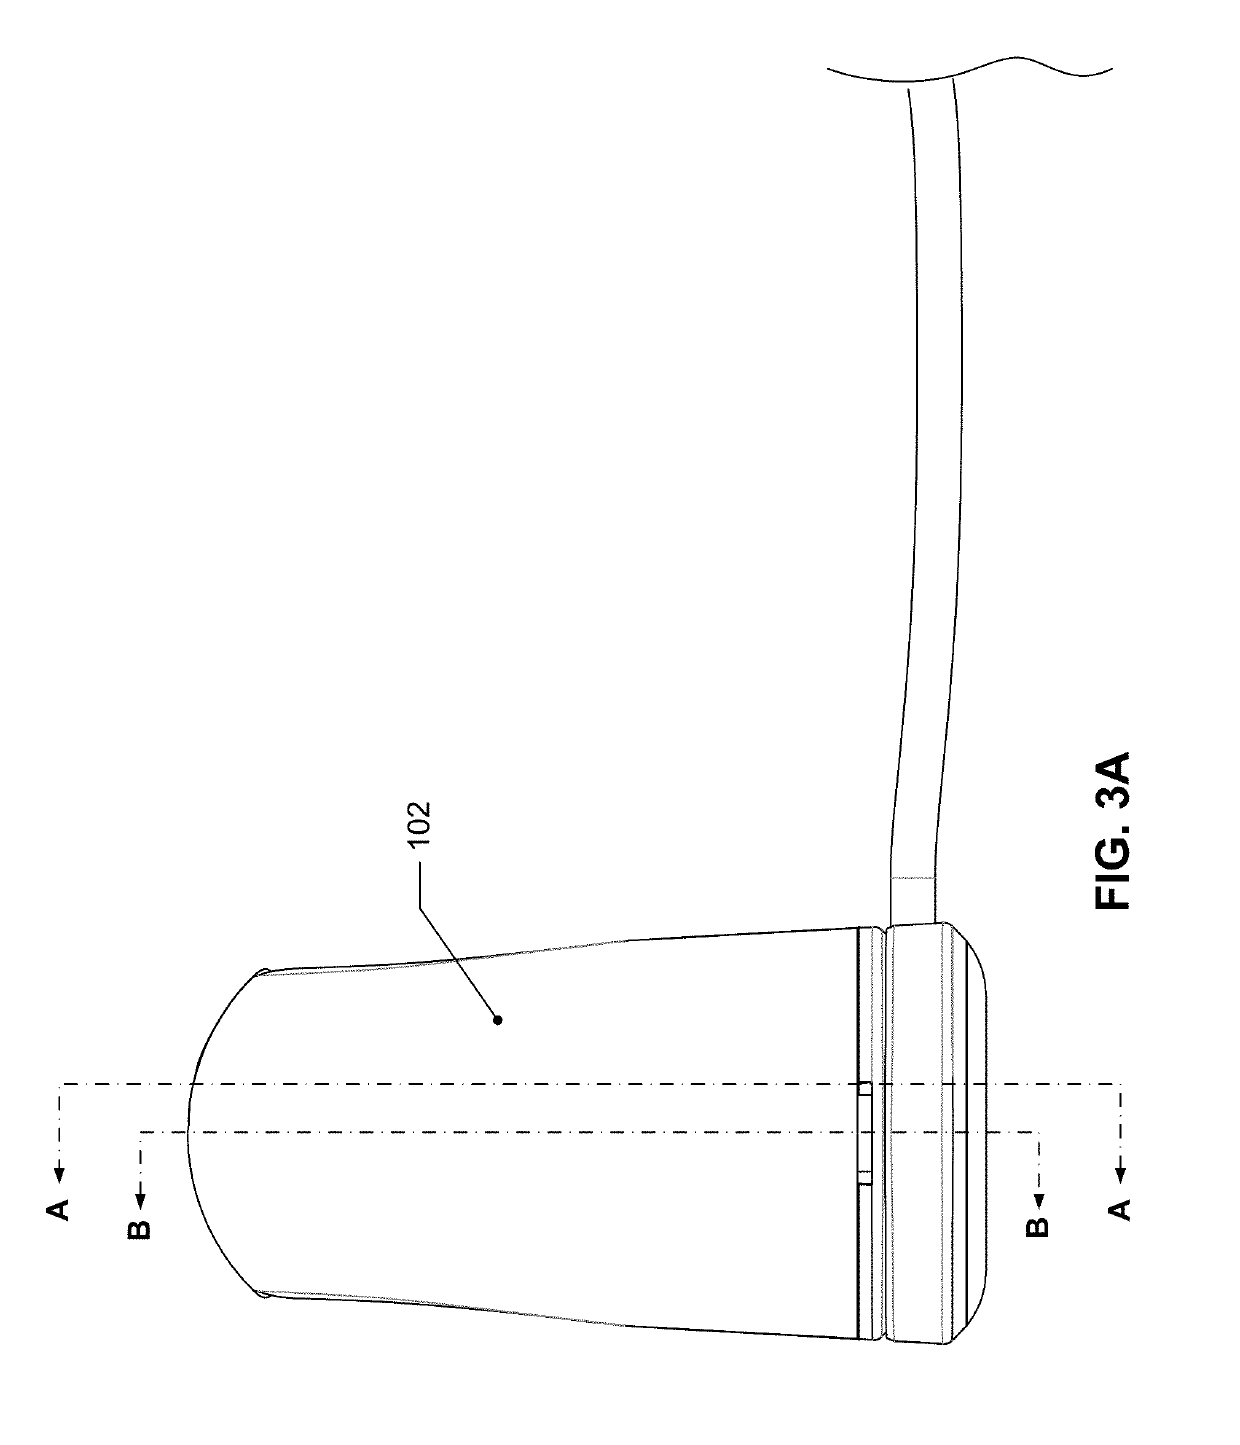 Position detection of blood pressure device